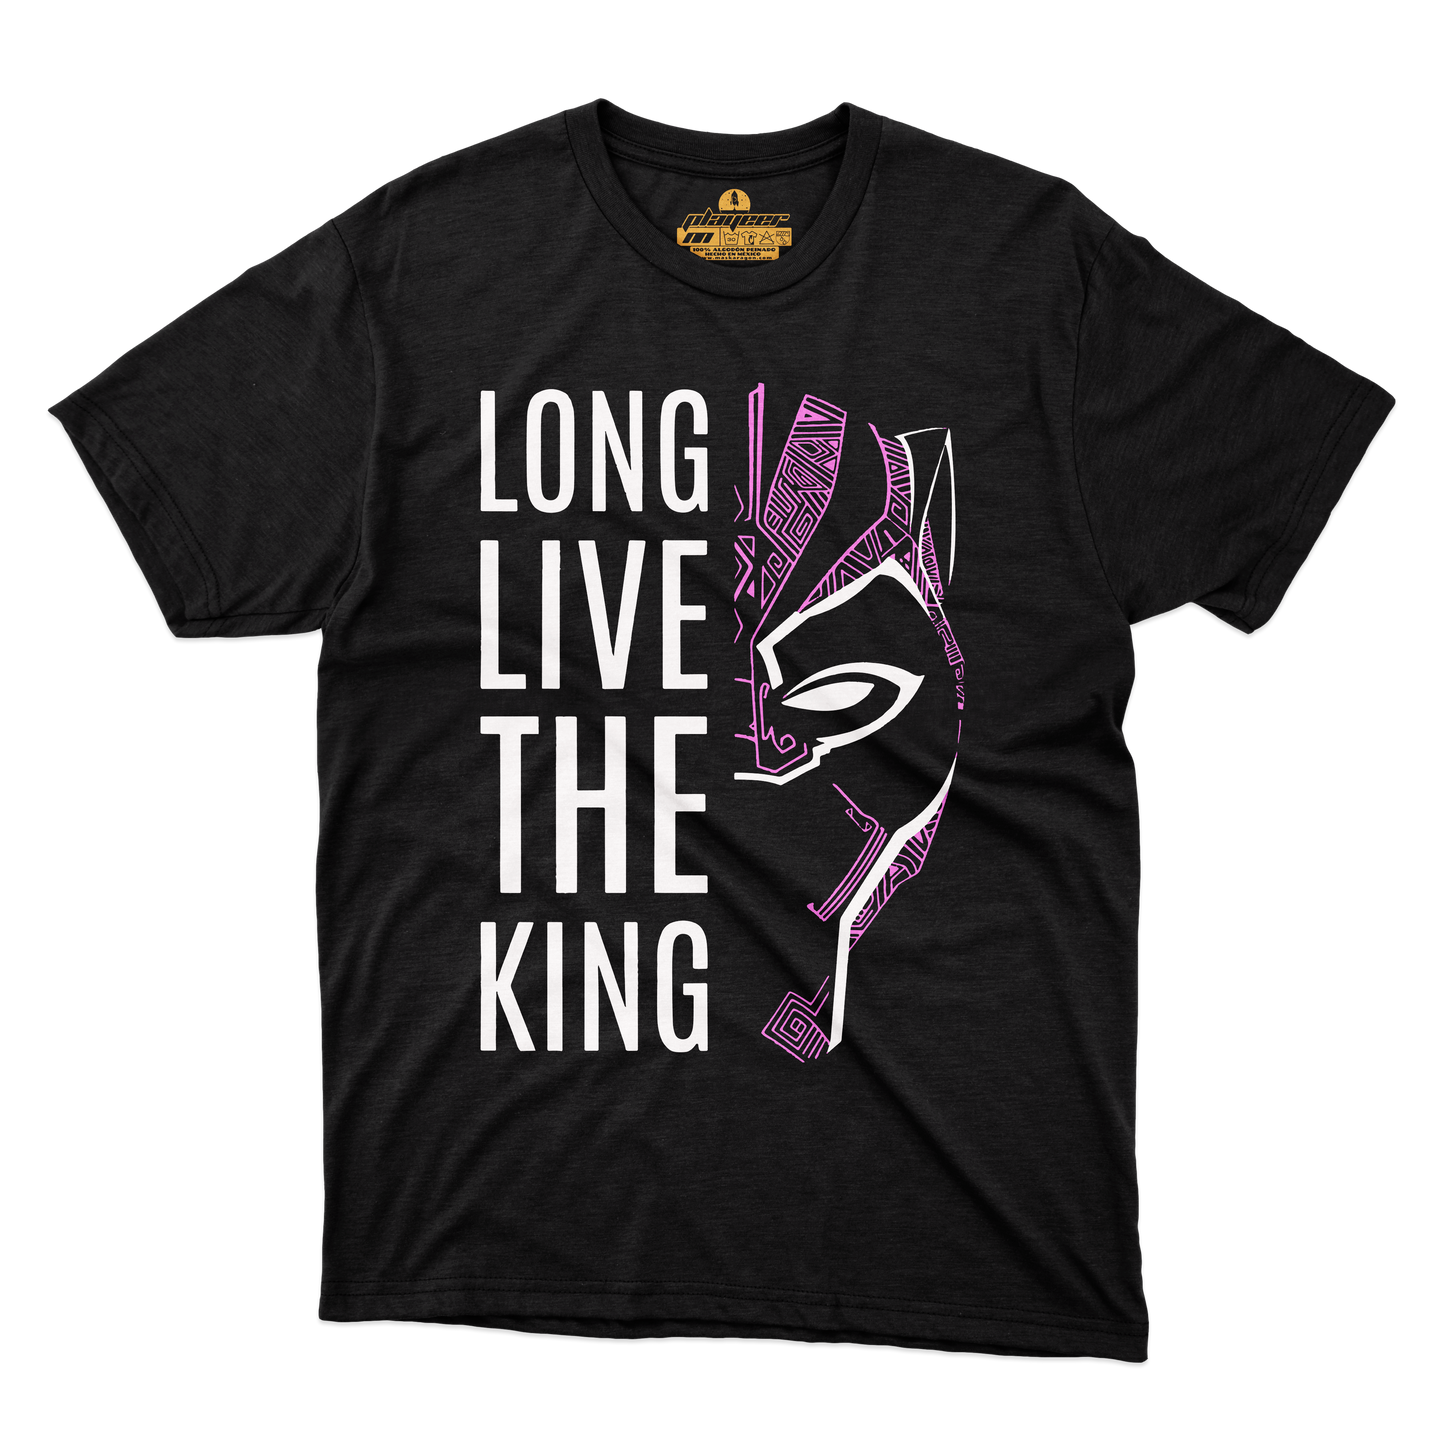 LONG LIVE THE KING